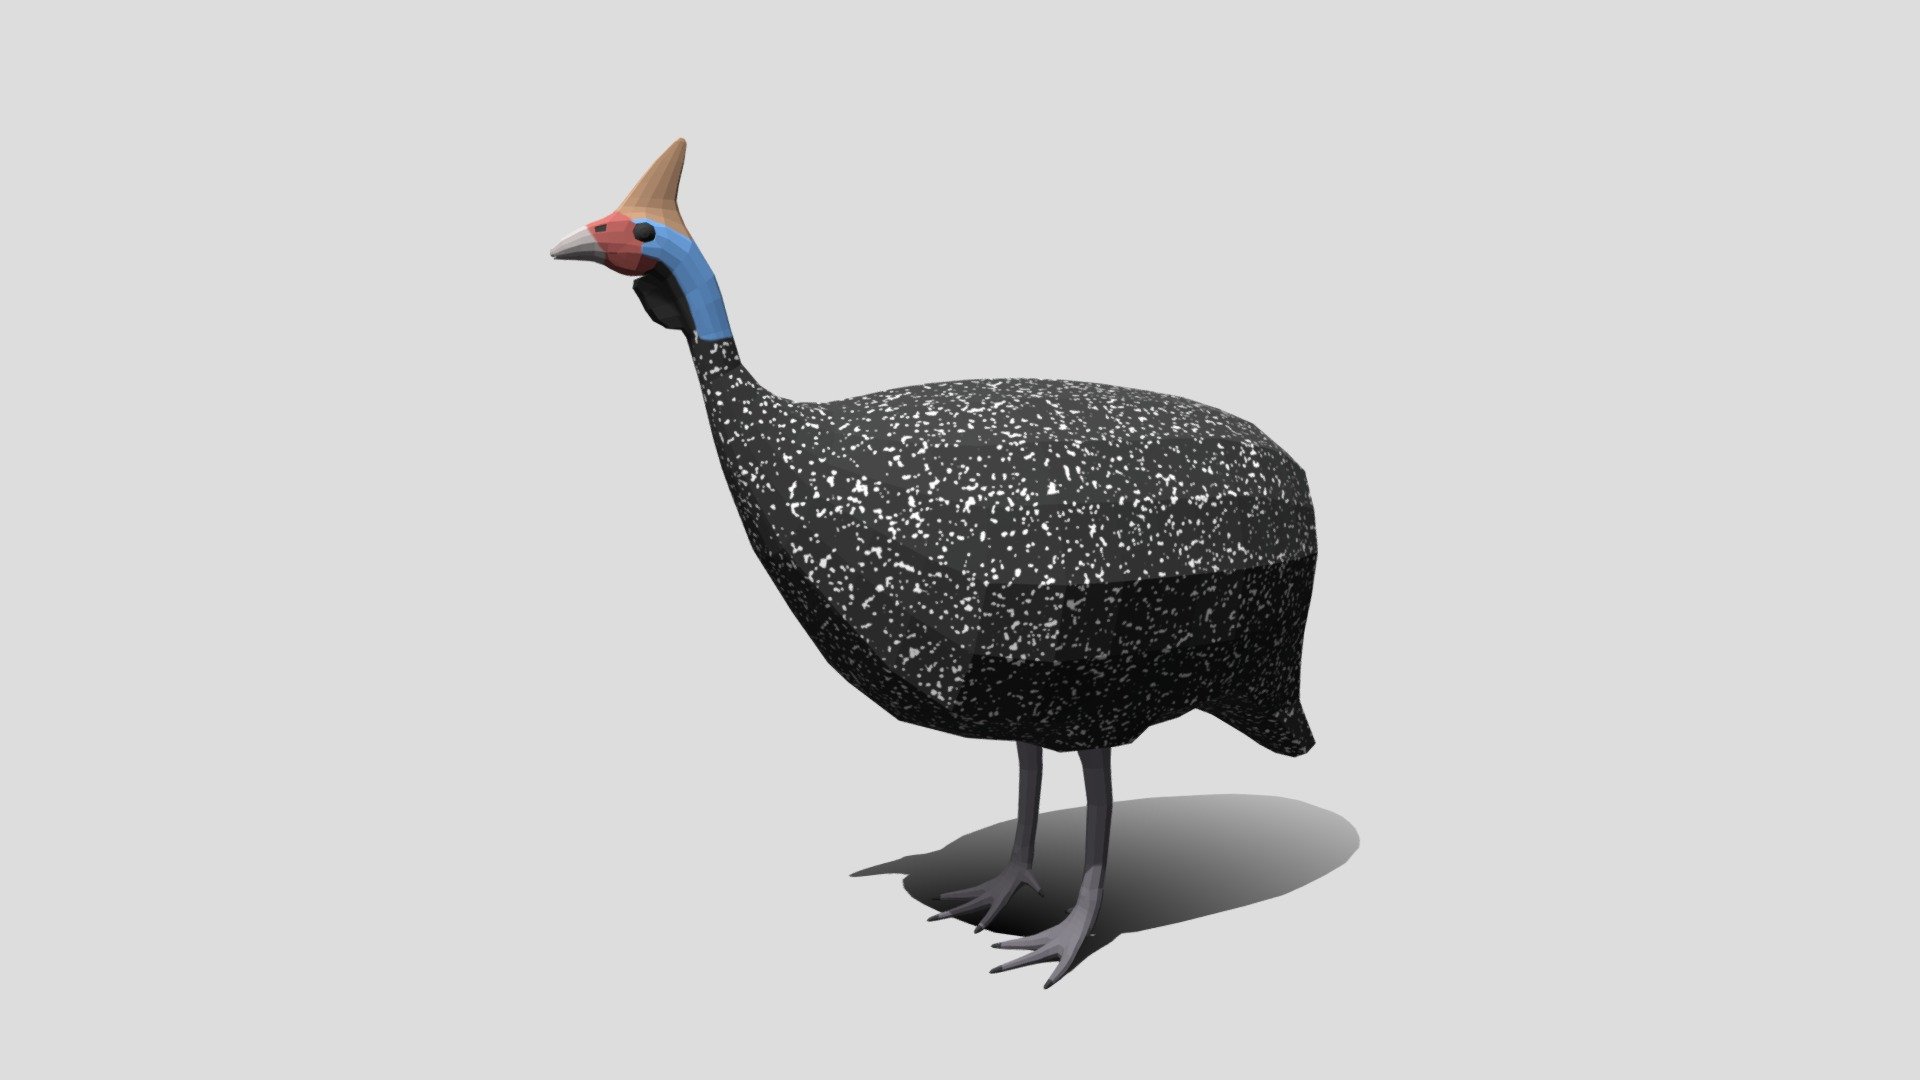 Helmeted Guineafowl. The low poly bird was modeled for low-poly style renderings, background, general CG visualization presented as one mesh with quads/tris.

Verts : 1.530 Faces : 1.520

Hand painted 2048x2048 diffuse texture is included, the 3d model is UV unwraped.

The original file was created in blender. You will receive a 3DS, OBJ, FBX, blend, DAE, STL, glTF.

Warning: Depending on which software package you are using, the exchange formats (.obj, .3ds, .dae .fbx) may not match the preview images exactly. there may be some textures that have to be loaded by hand and possibly triangulated geometry.

Product is ready to render out-of-the-box. Please note that the lights, cameras, and background is only included in the .blend file. The model is clean and alone in the other provided files, centred at origin and has real-world scale 3d model